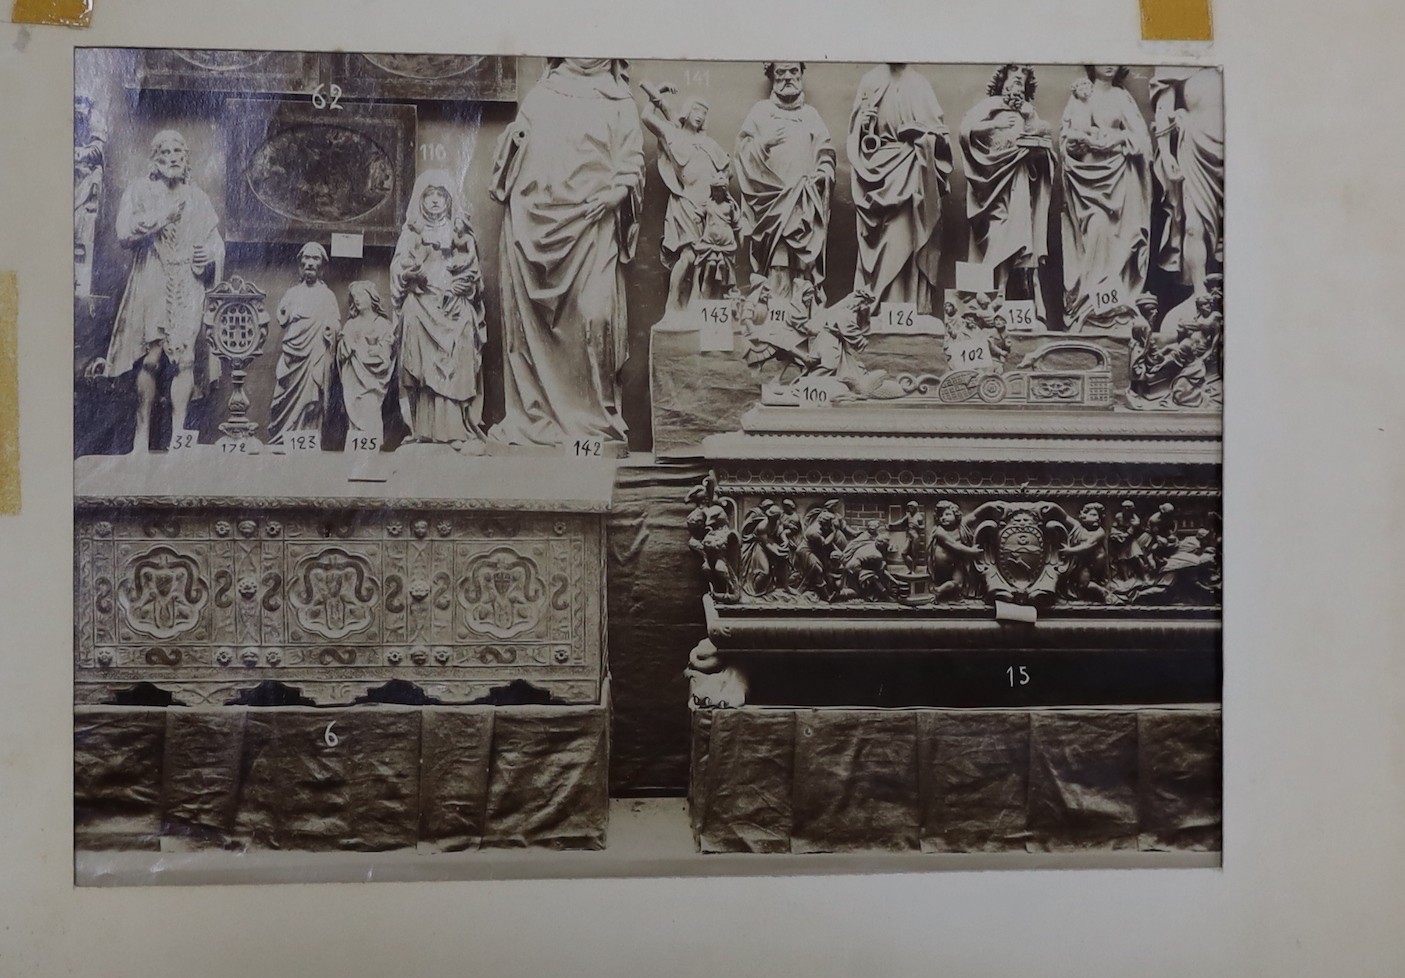 G. Borelli of Rome. A folio of photographs of antiquities and historical artefacts, together with an etching by Hedley Fitton, overall 49 x 38cm